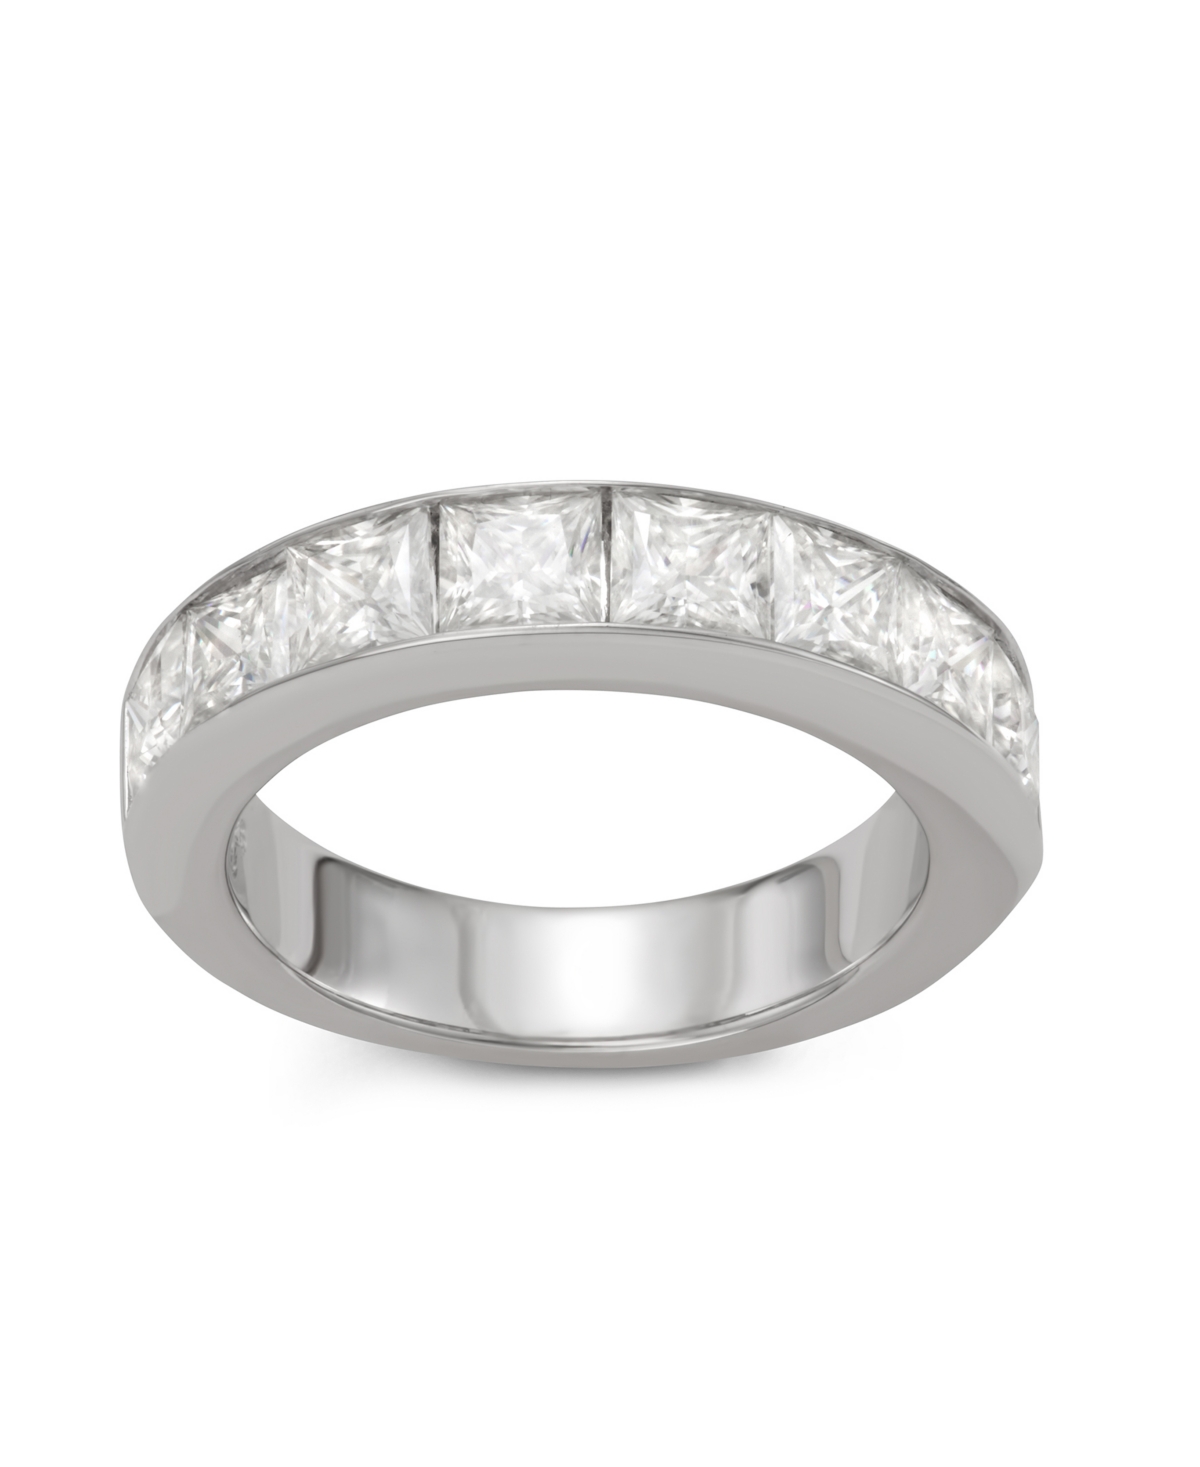 Moissanite Princess Cut Wedding Band (3 ct. t.w. Diamond Equivalent) in Sterling Silver - Sterling Silver